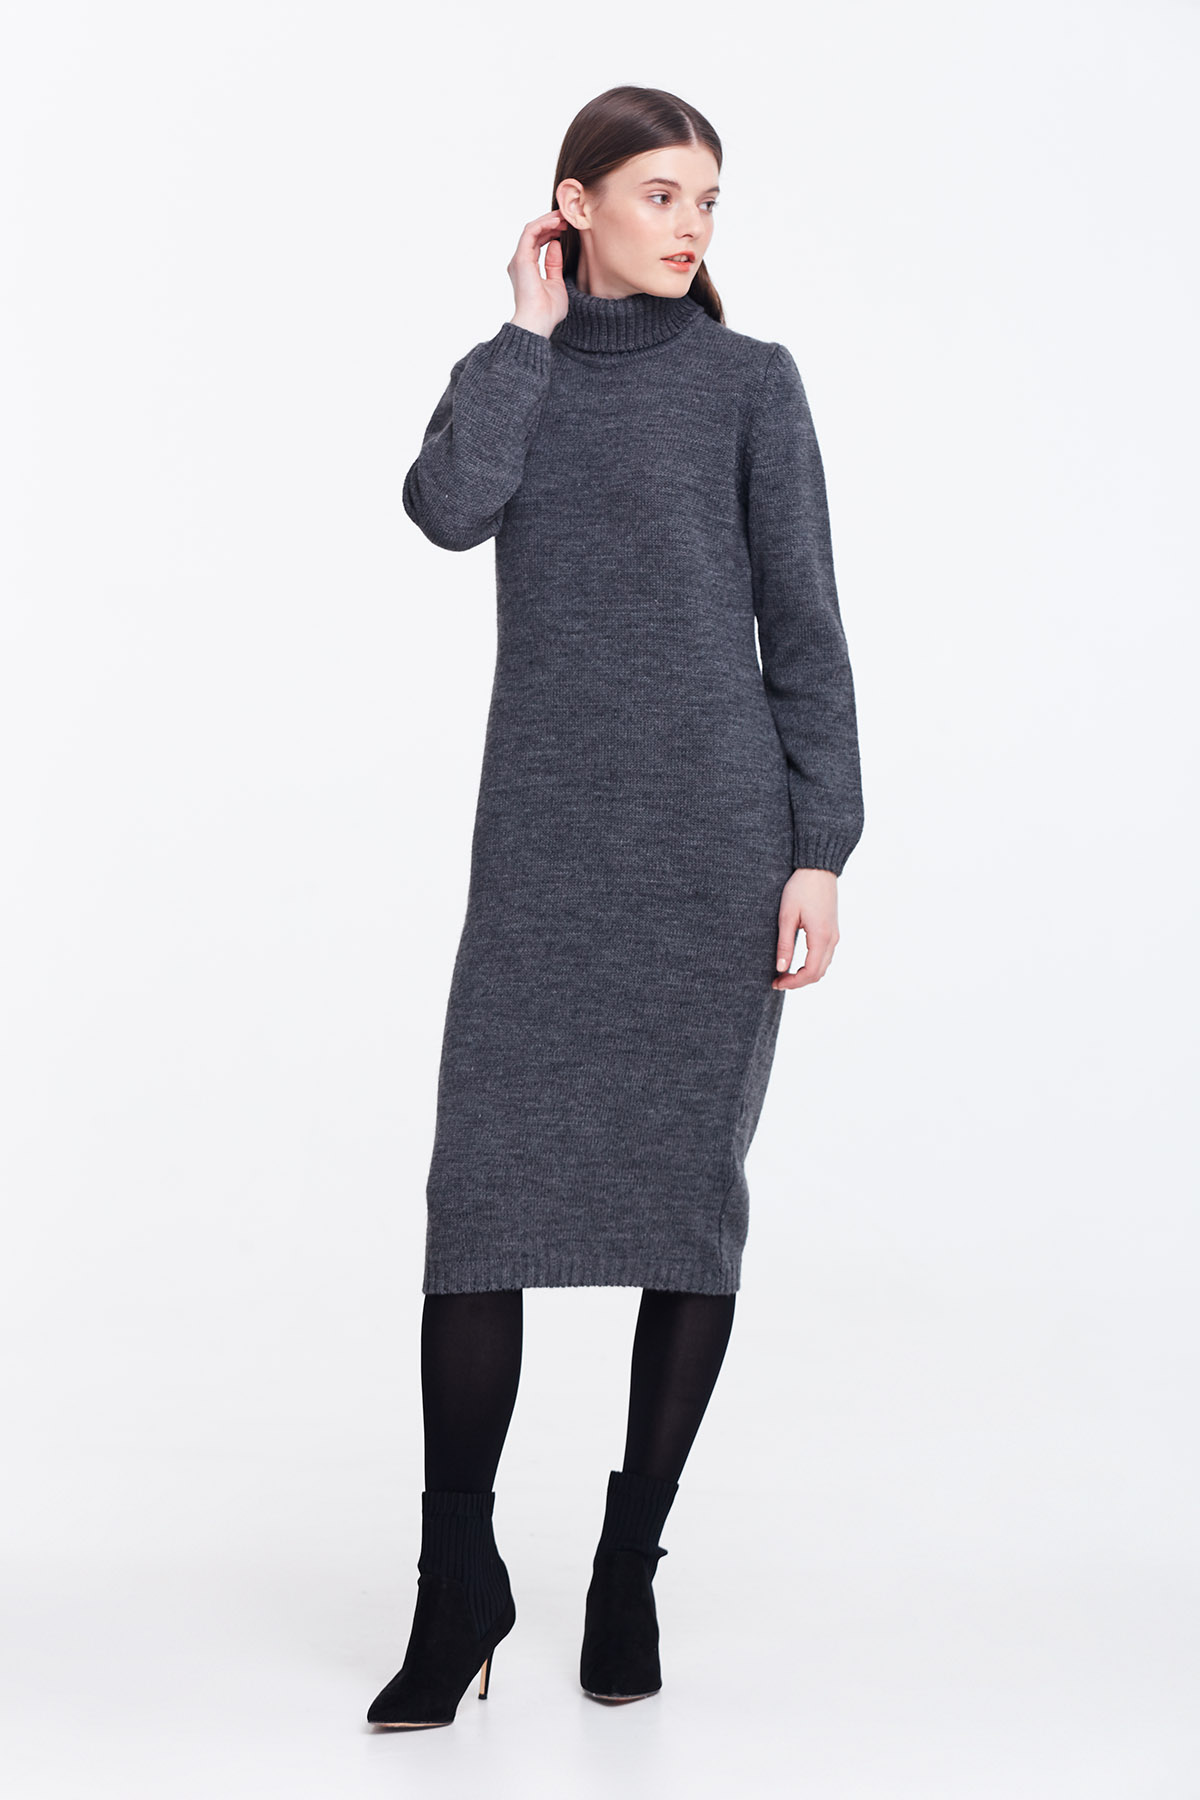 Grey knit dress with a stand up collar, photo 5